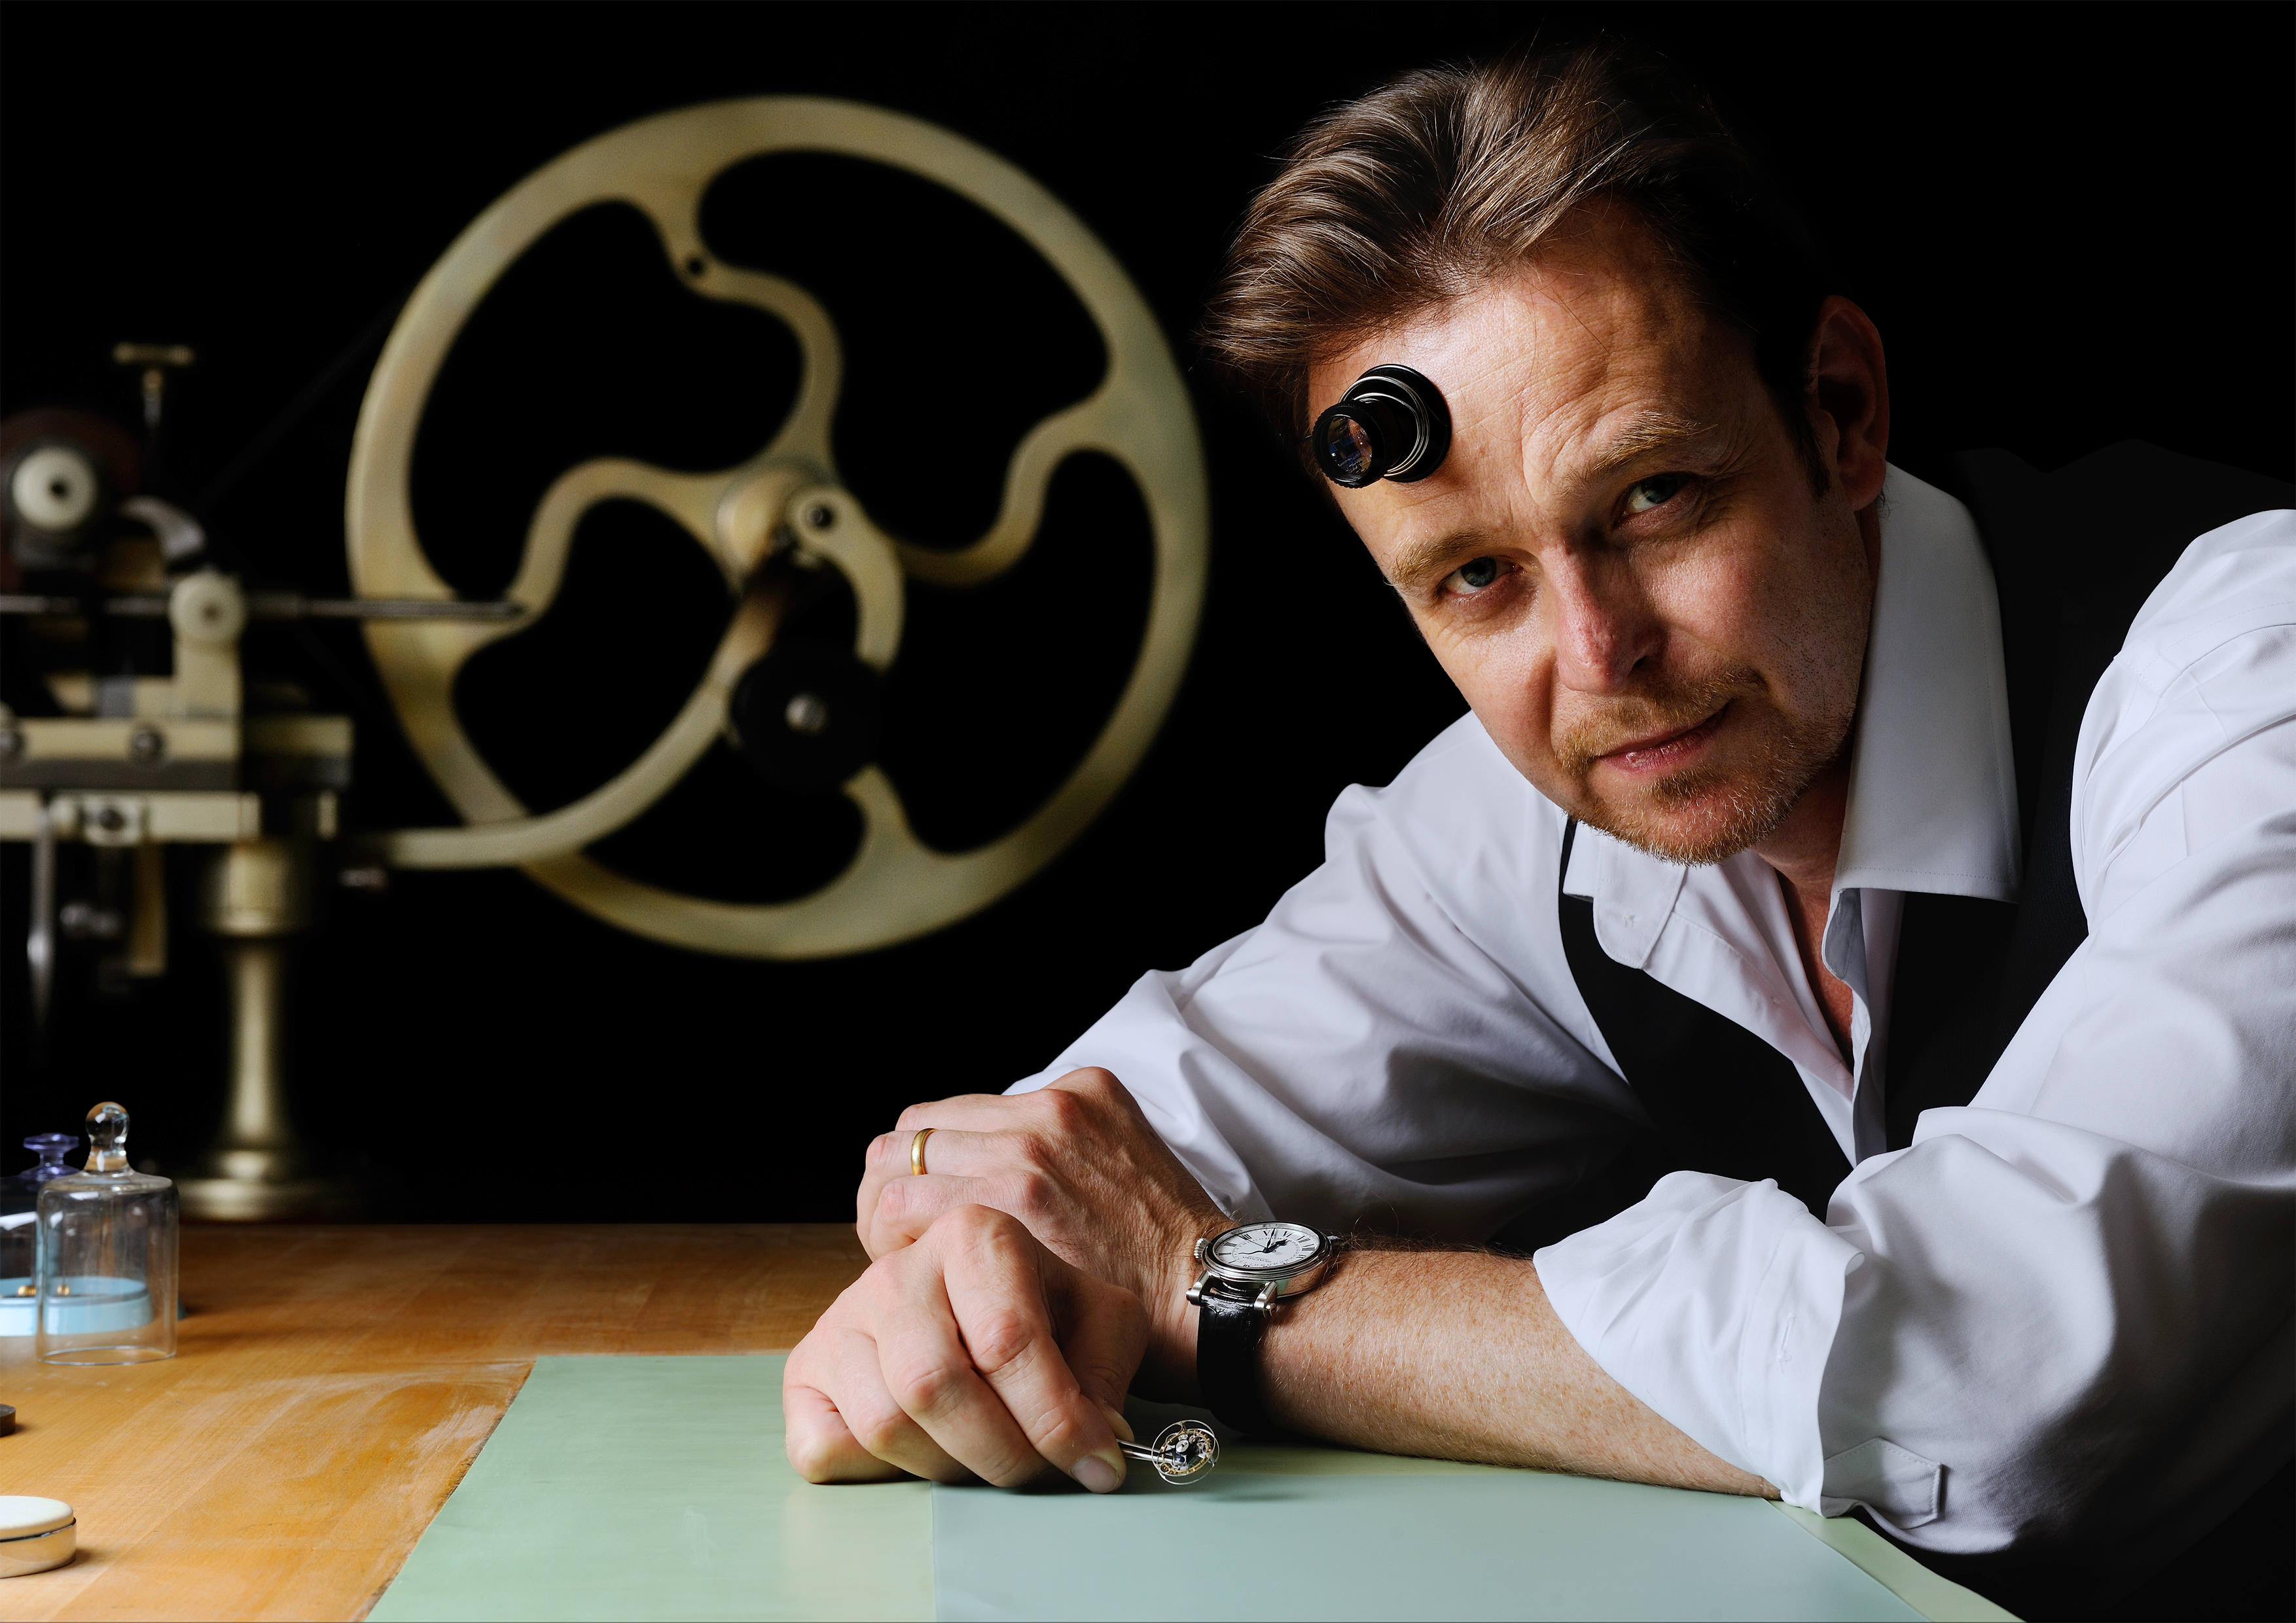 English watchmaker Peter Speake-Marin founded Speake-Marin in 2002, a watchmaking company based in Switzerland.